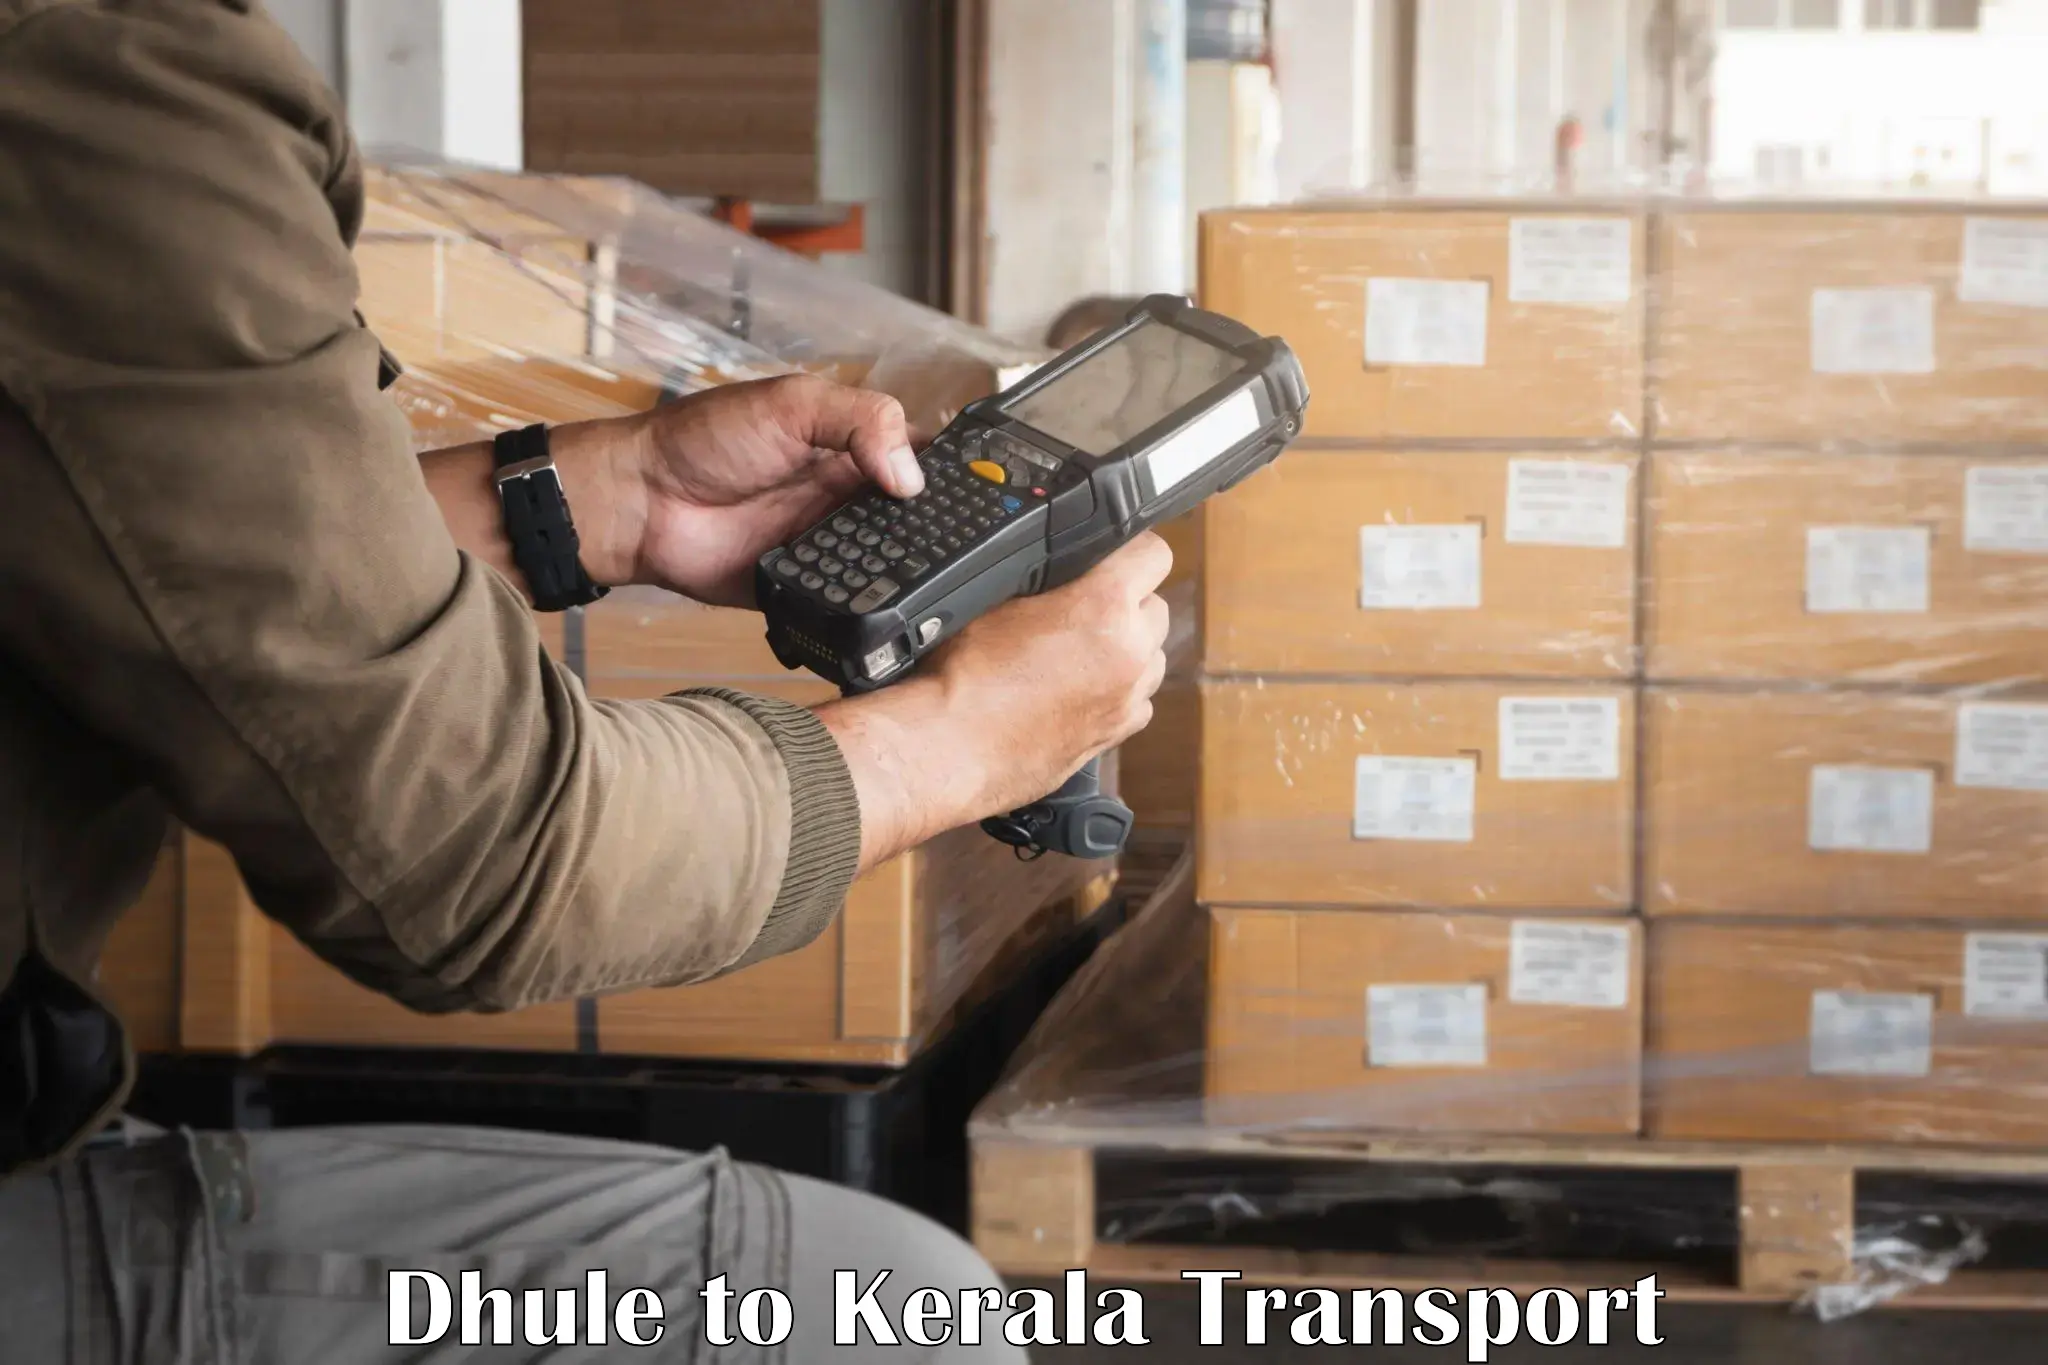 Road transport online services Dhule to Kanjiramattom